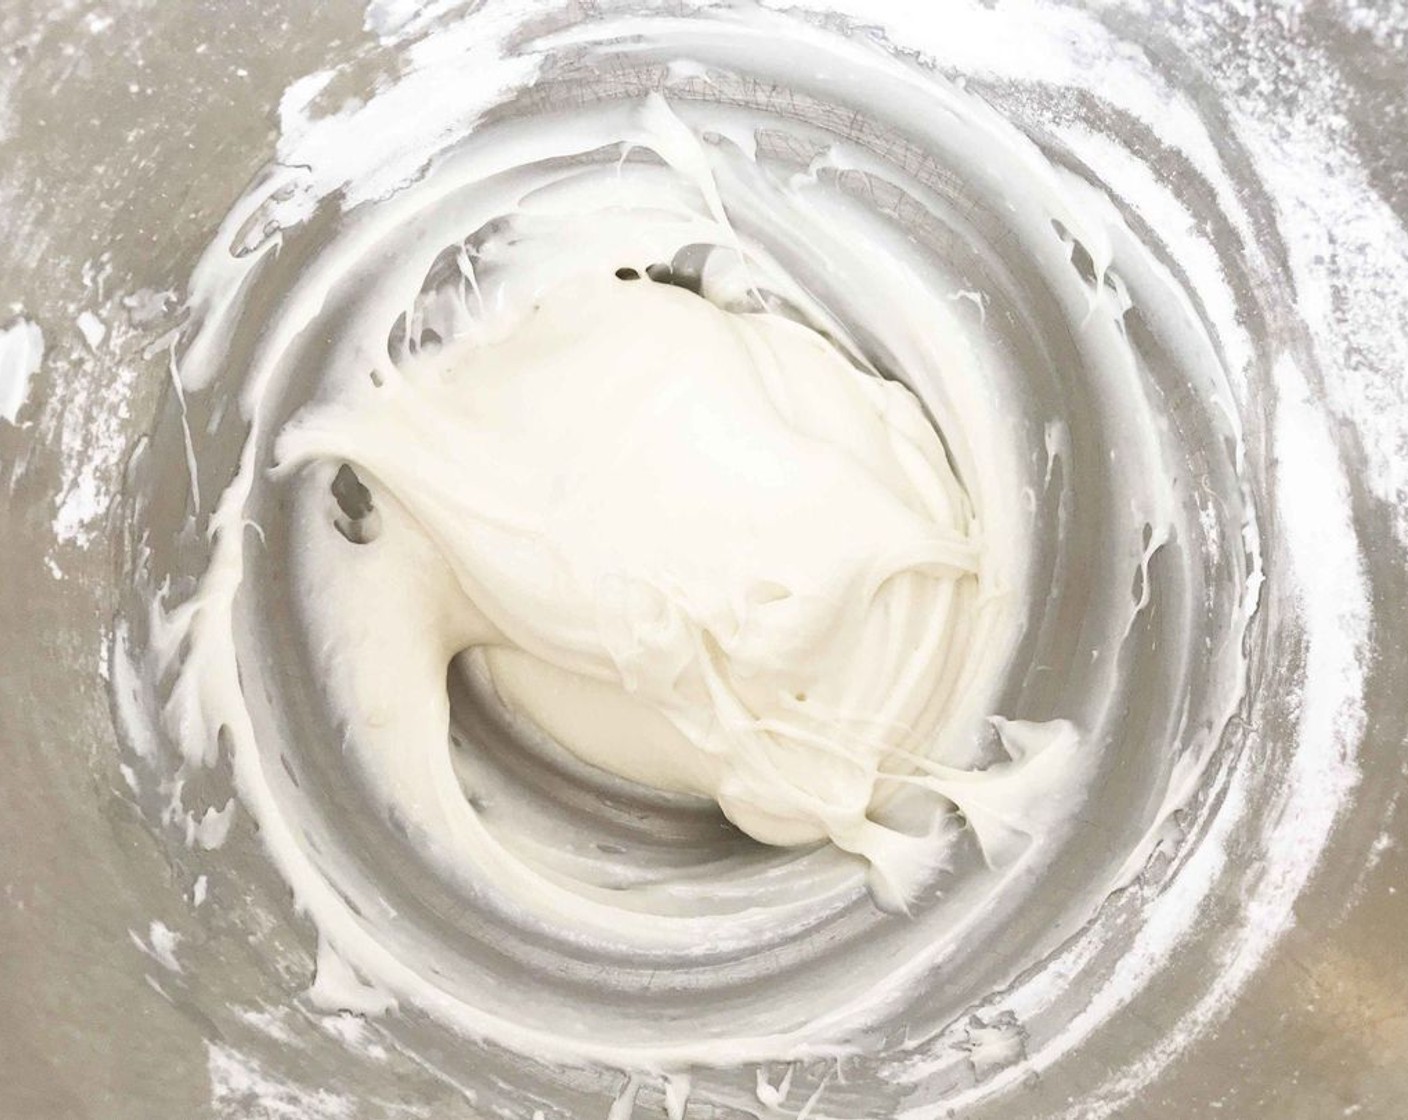 step 7 While the cakes are cooling, beat together the Neufchâtel Cheese (1 cup), Powdered Confectioners Sugar (1 1/2 cups), and Vanilla Extract (1 tsp) to create your cream cheese frosting.